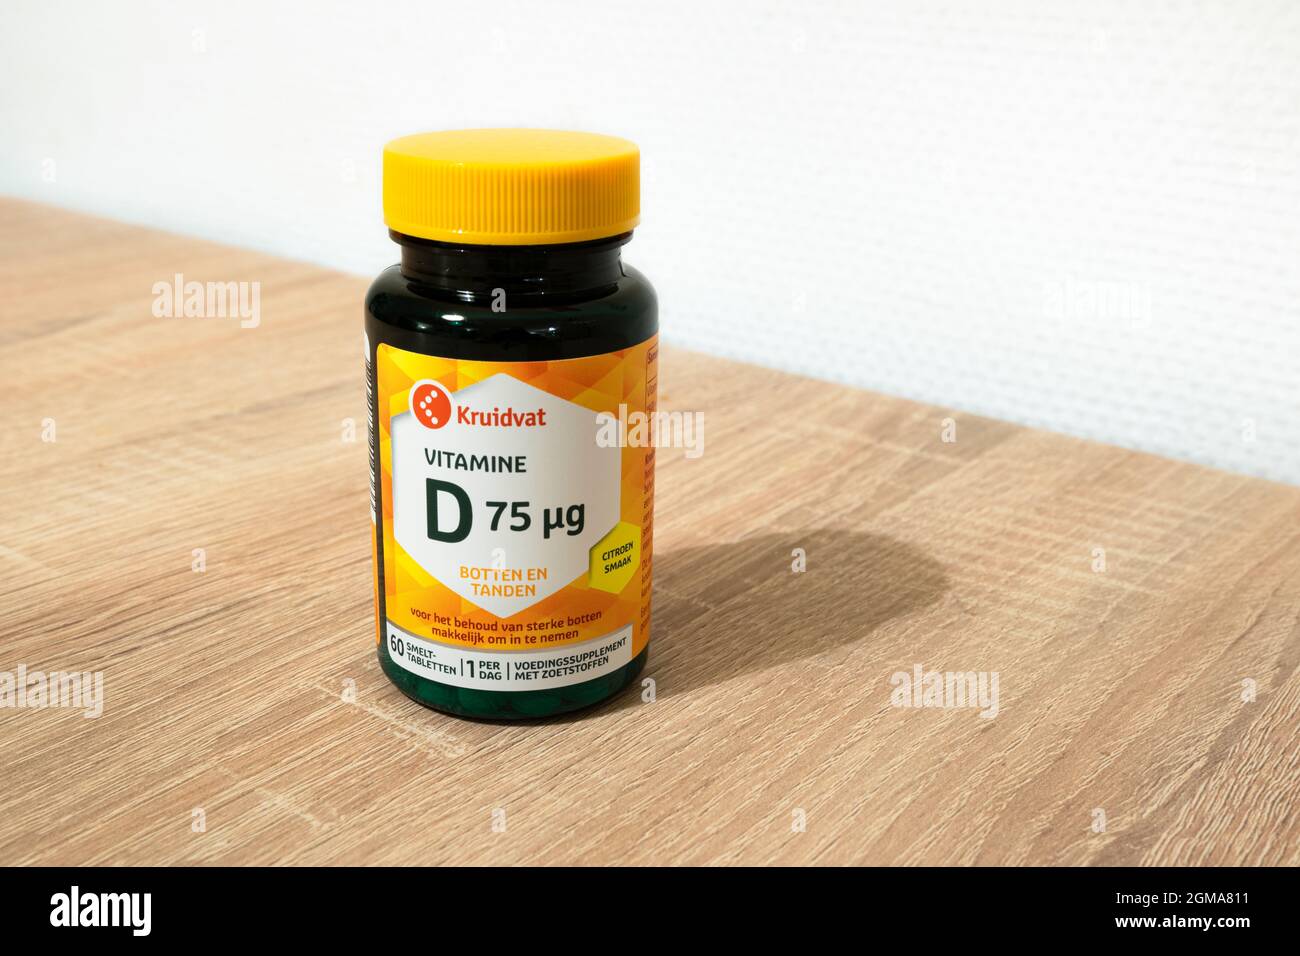 Vitamine Pill High Resolution Stock Photography and Images - Alamy